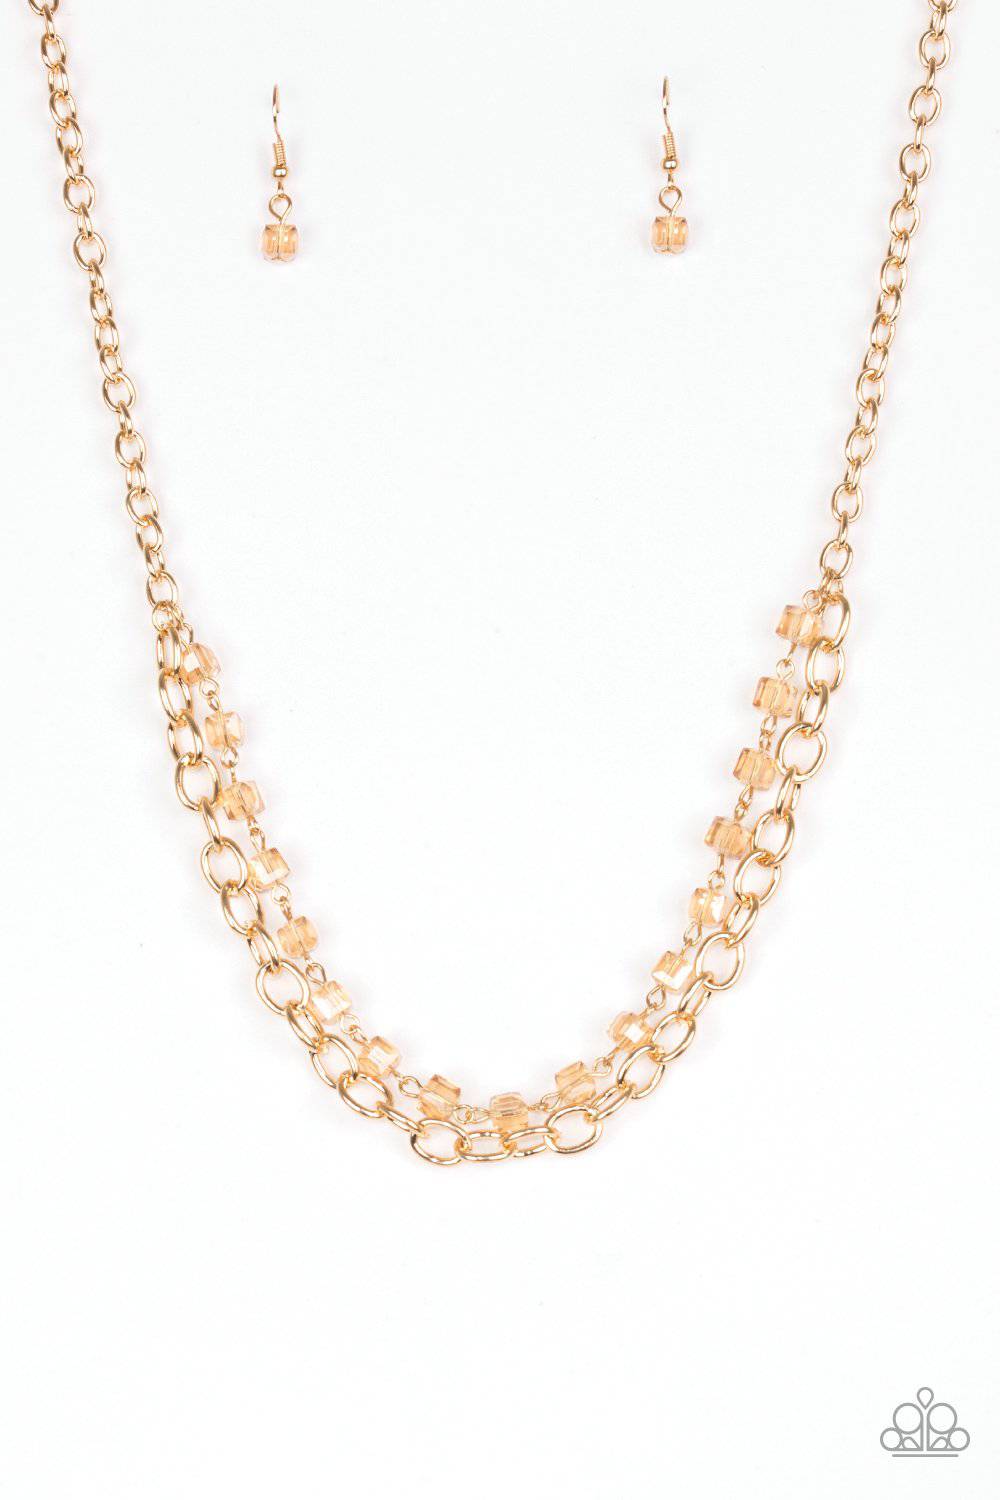 Block Party Princess - Gold Crystal-like Necklace - Paparazzi Accessories - GlaMarous Titi Jewels